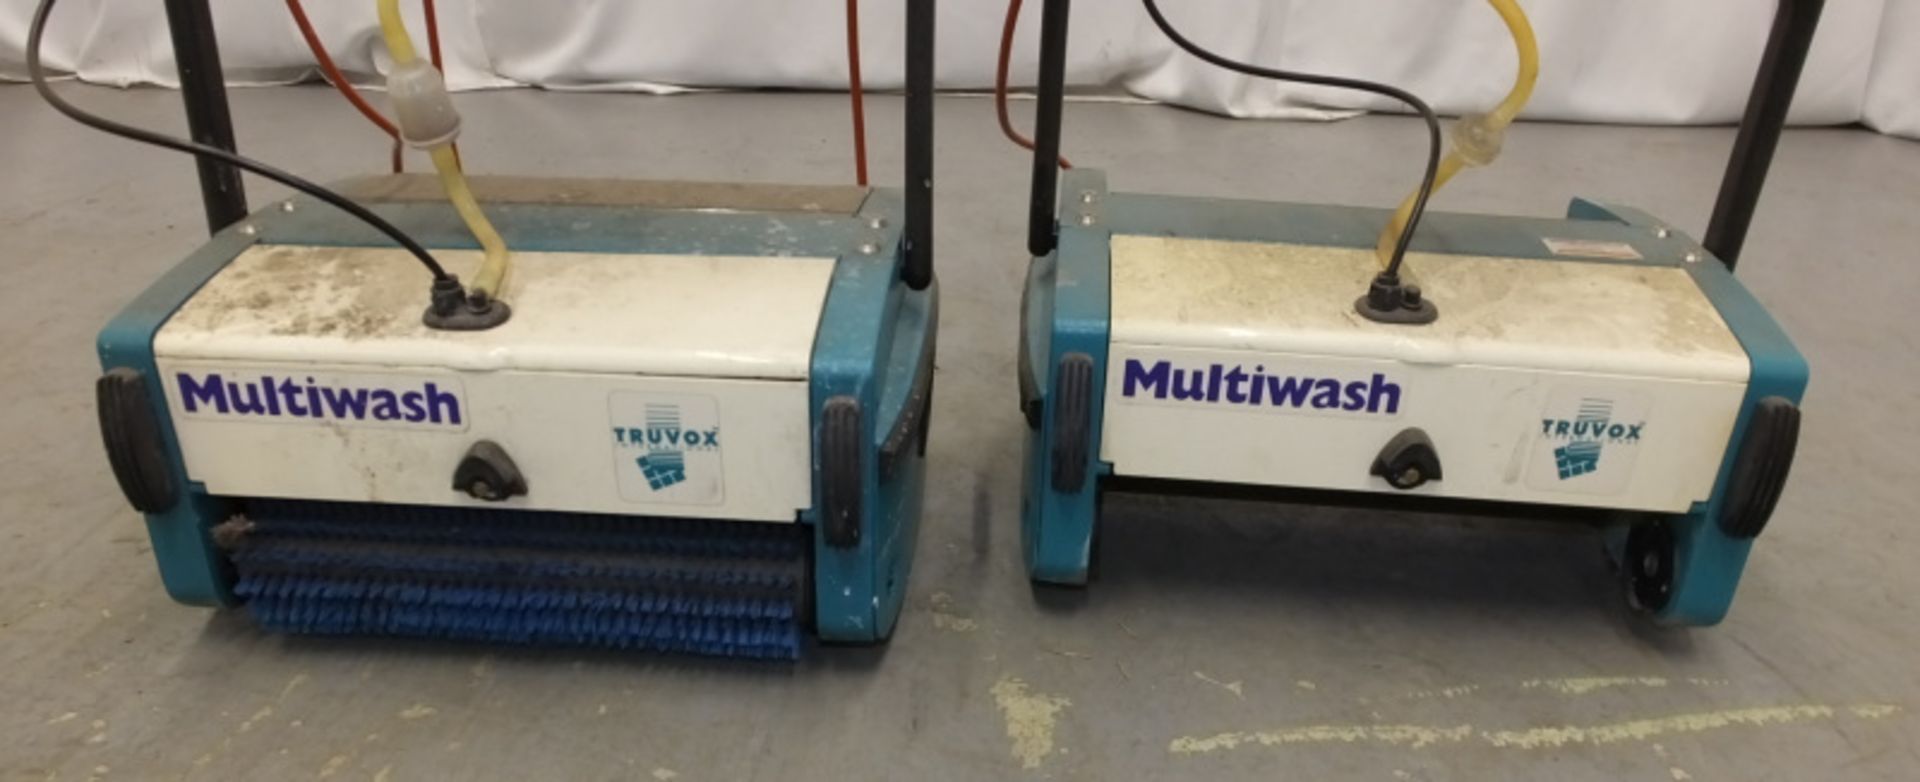 2 x Truvox MW340/PUMP Multiwash Scrubber Dryers - See Pictures for Missing Parts - Image 2 of 5